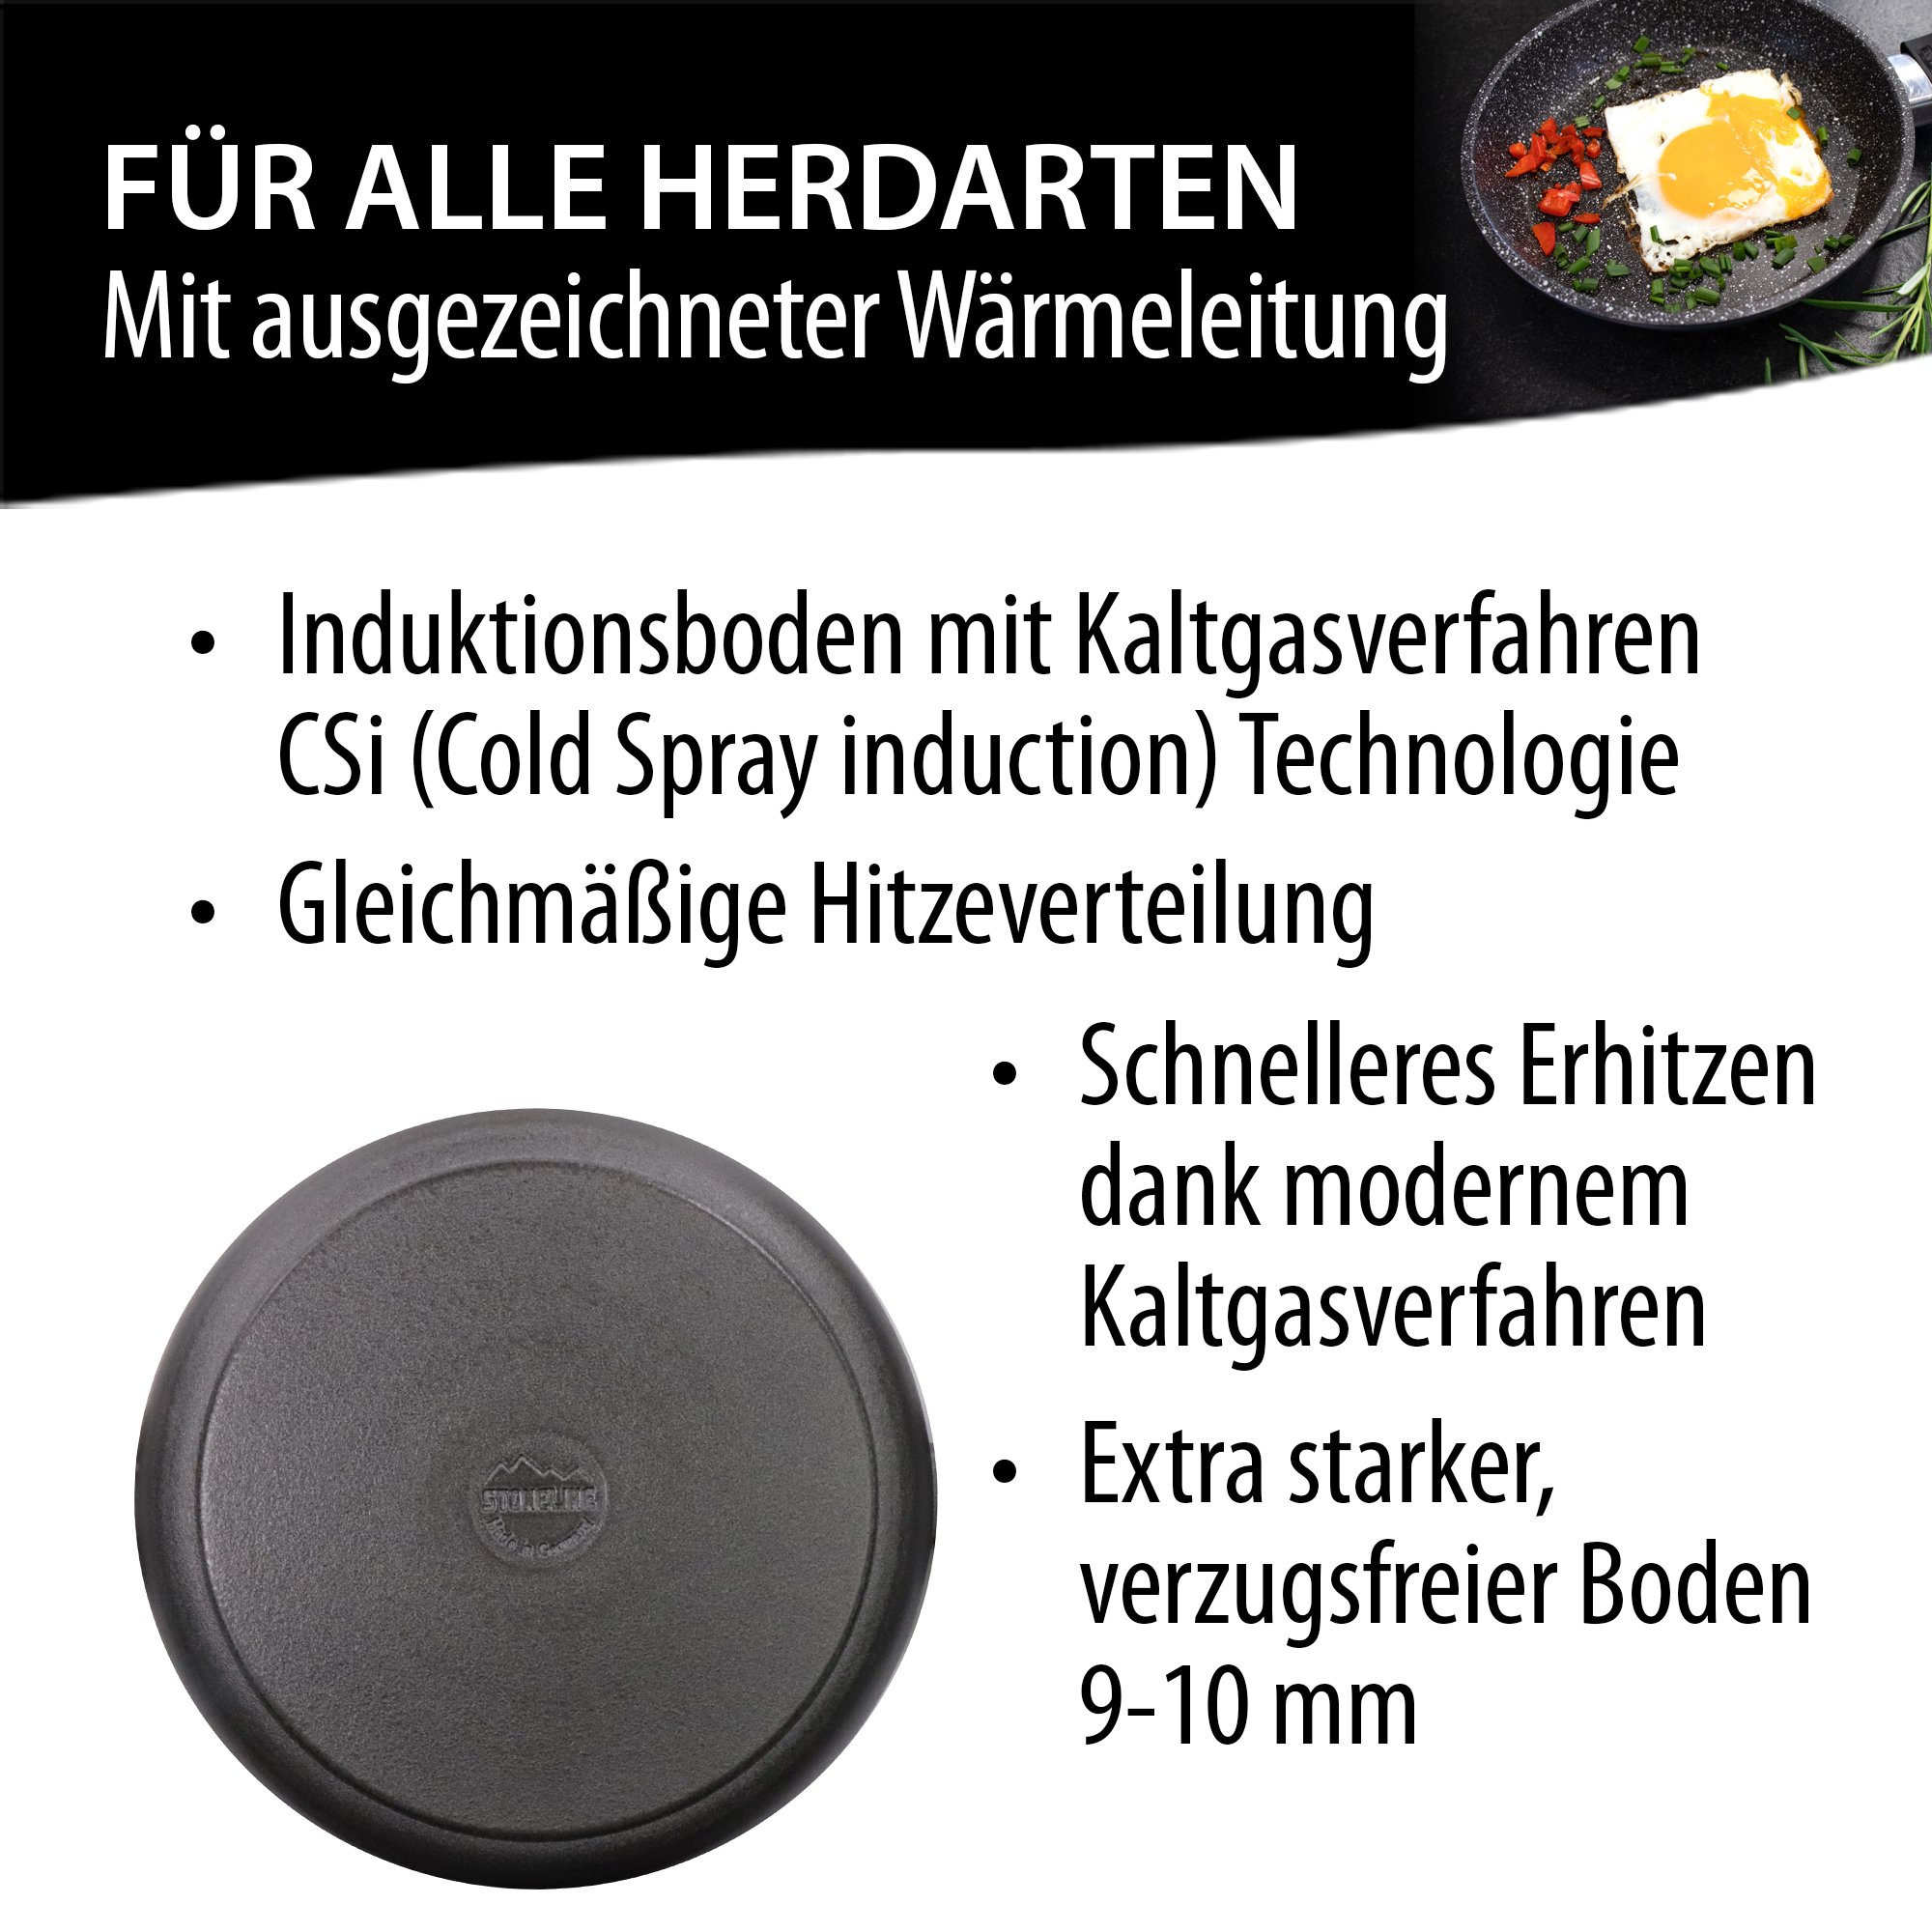 STONELINE® Frying Pan 24 cm, Removable Handle, Cast Non-Stick Pan | Made in Germany